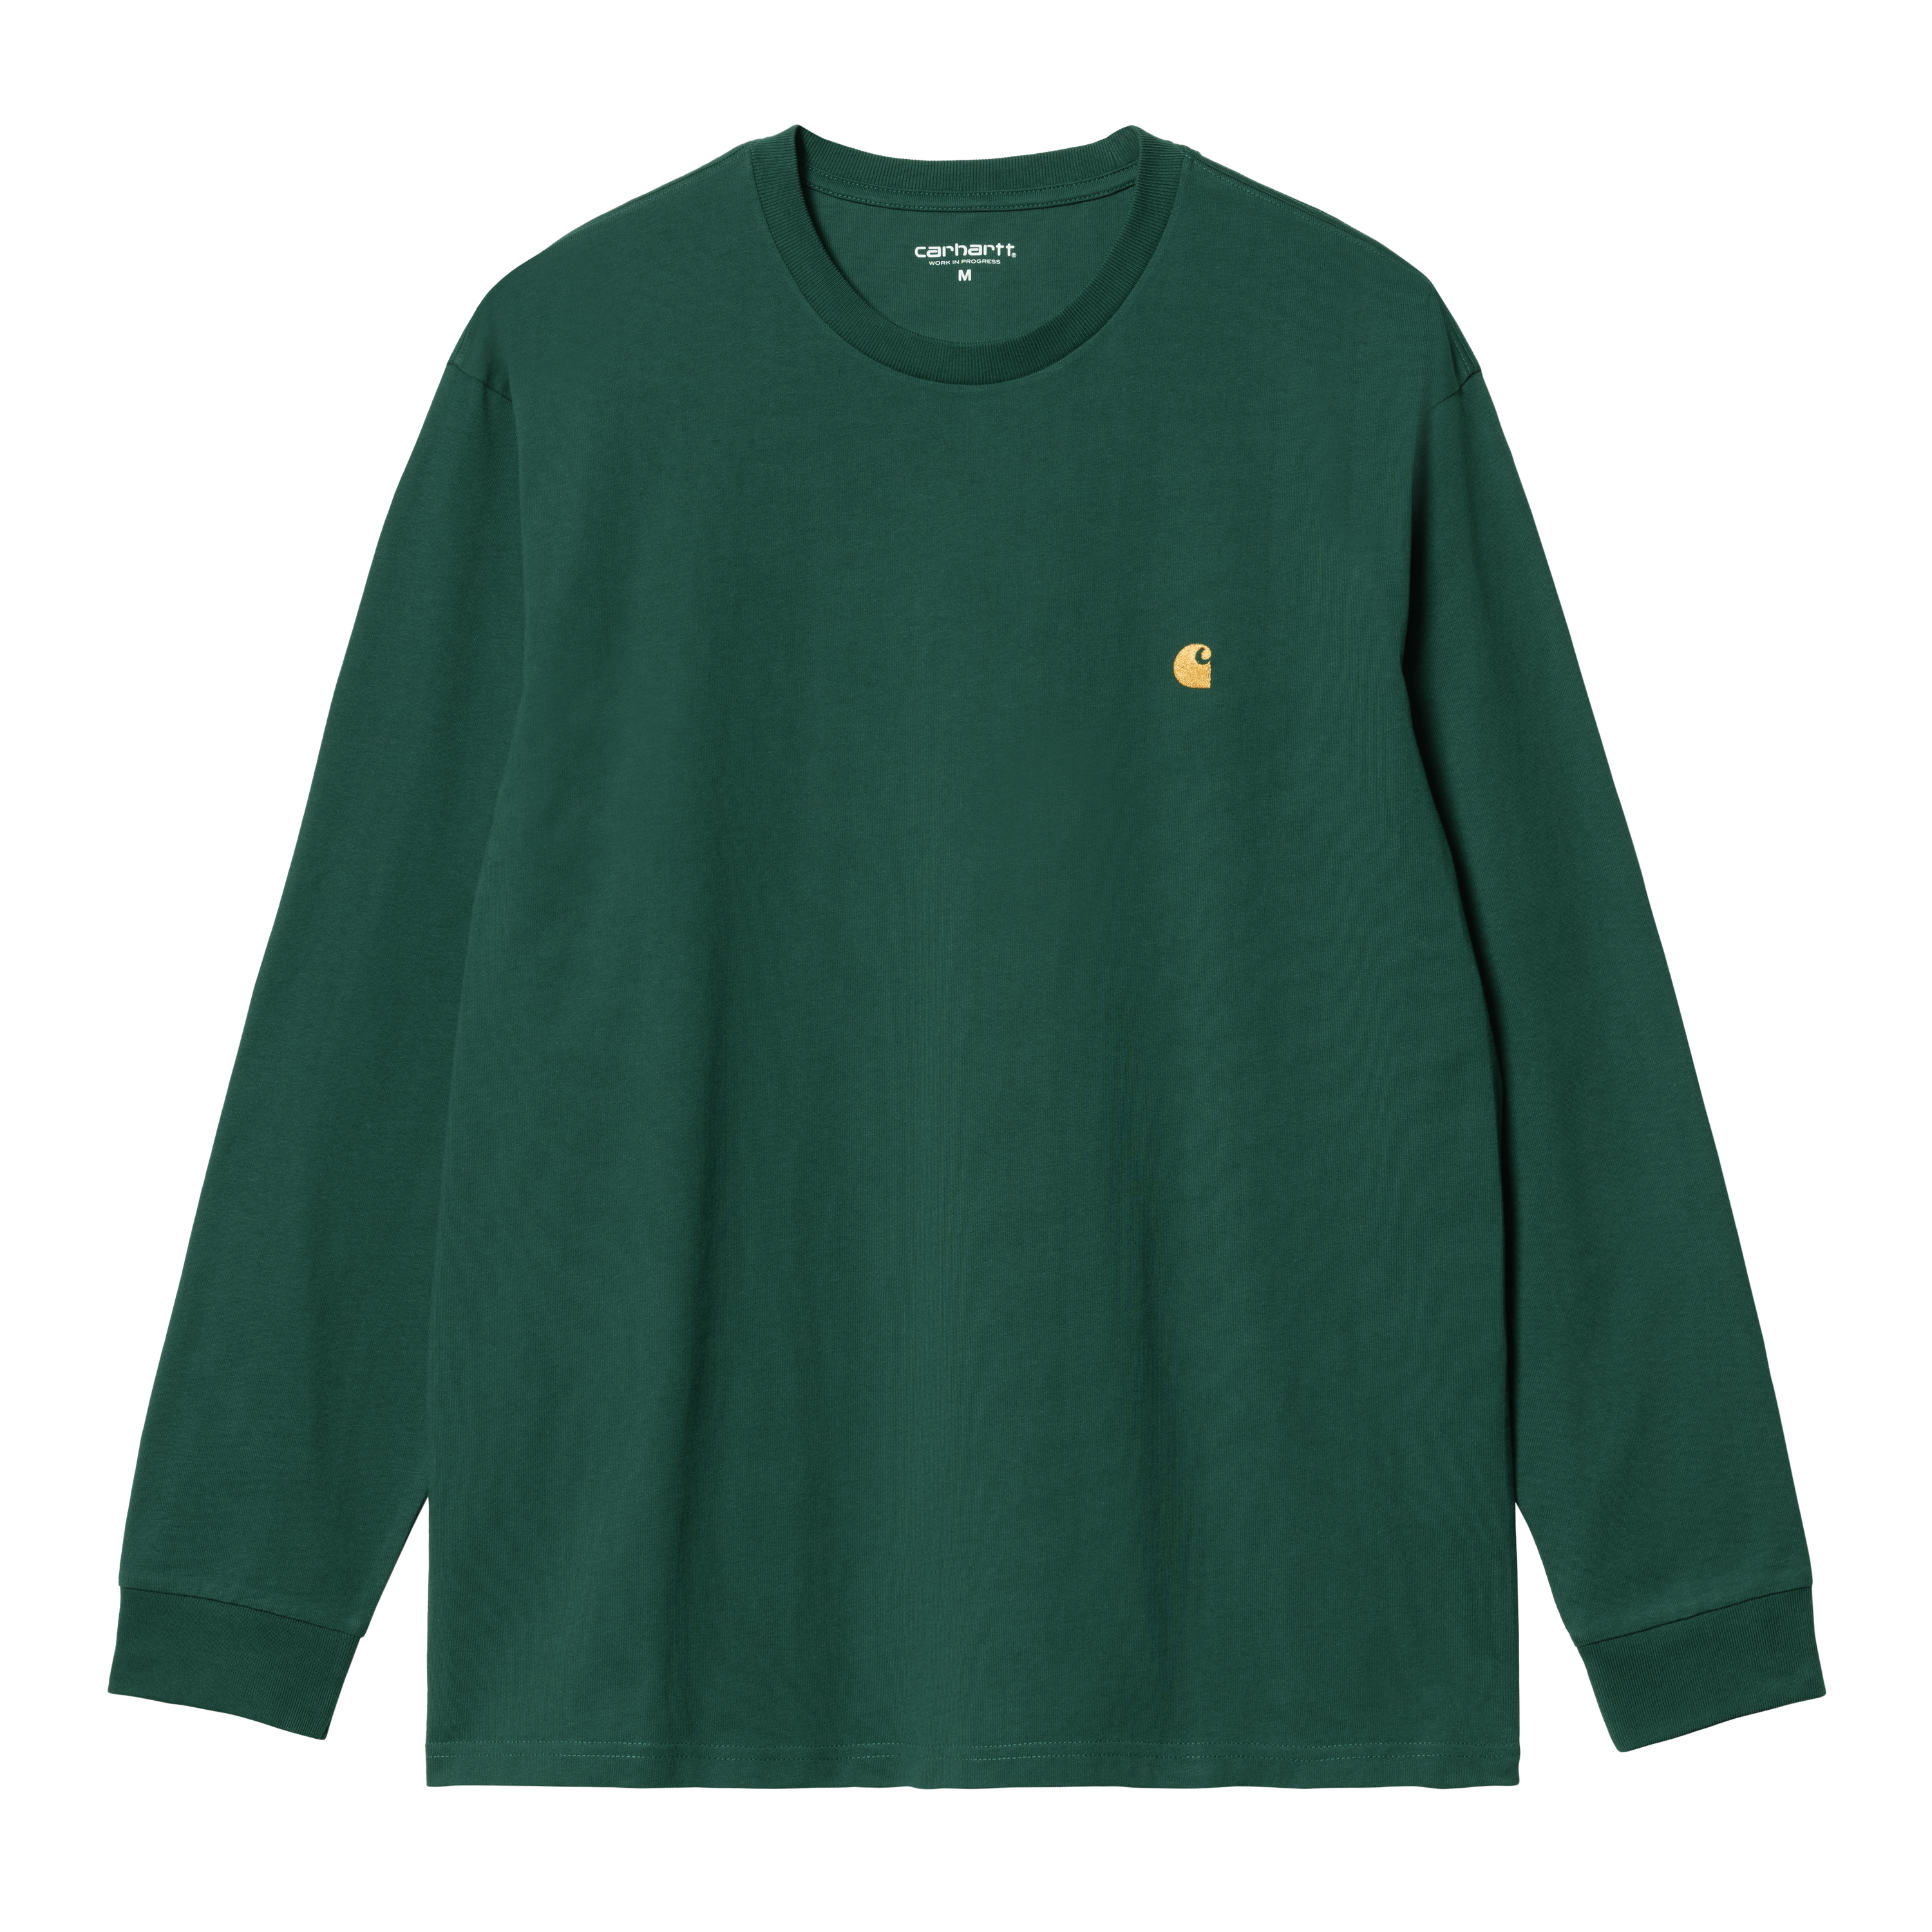 Carhartt WIP Long Sleeve Chase T-Shirt in Verde